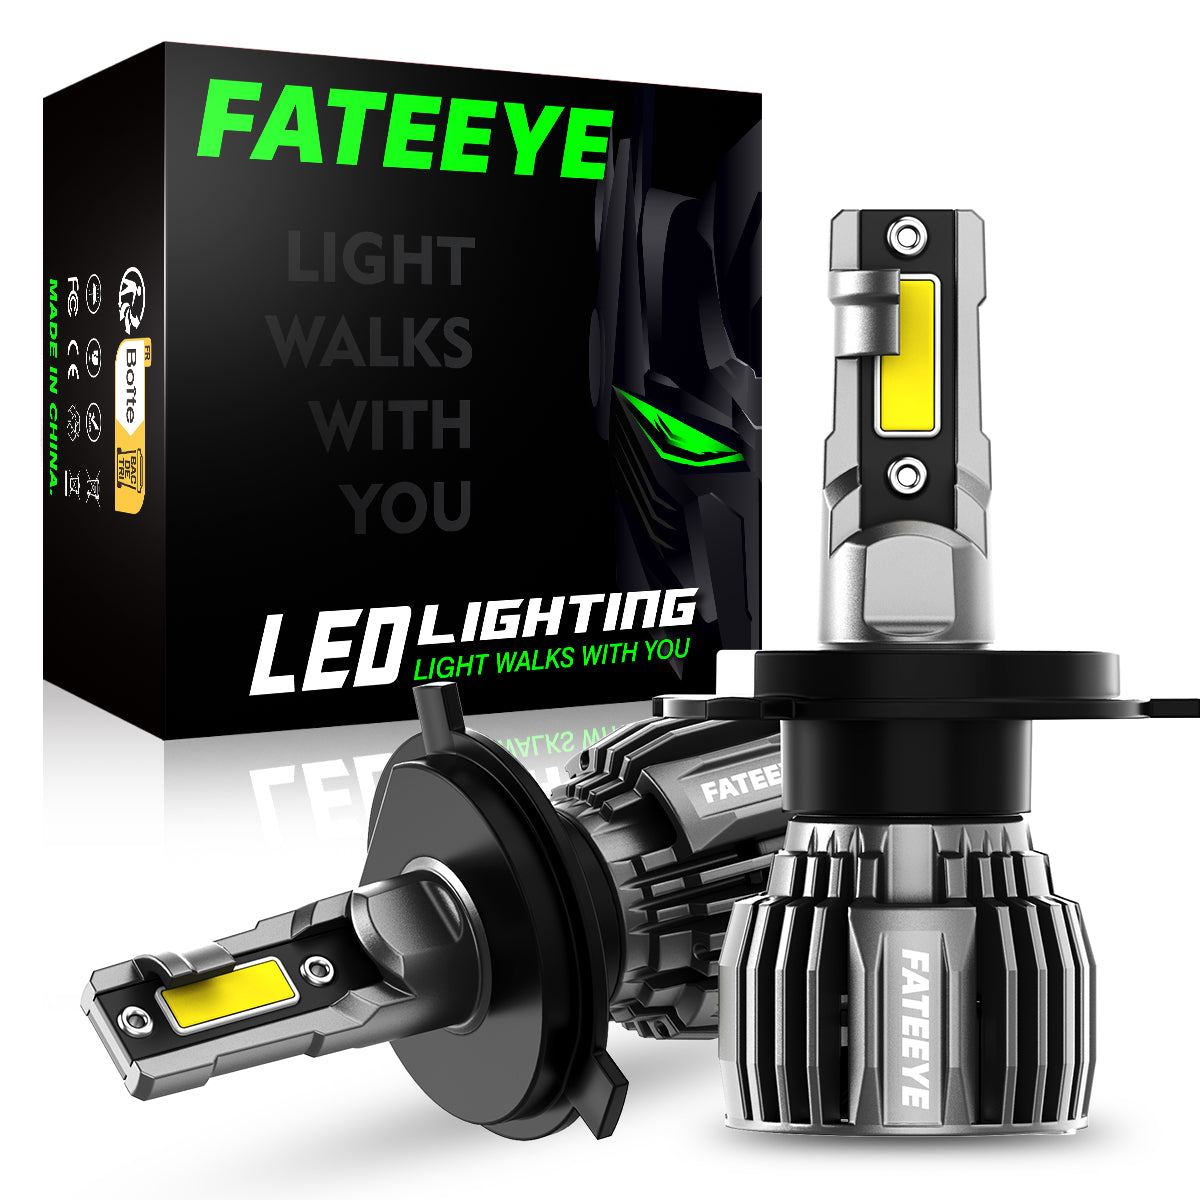 Shop for the Brightest H7 High Low Beam Headlights 200W Brightest